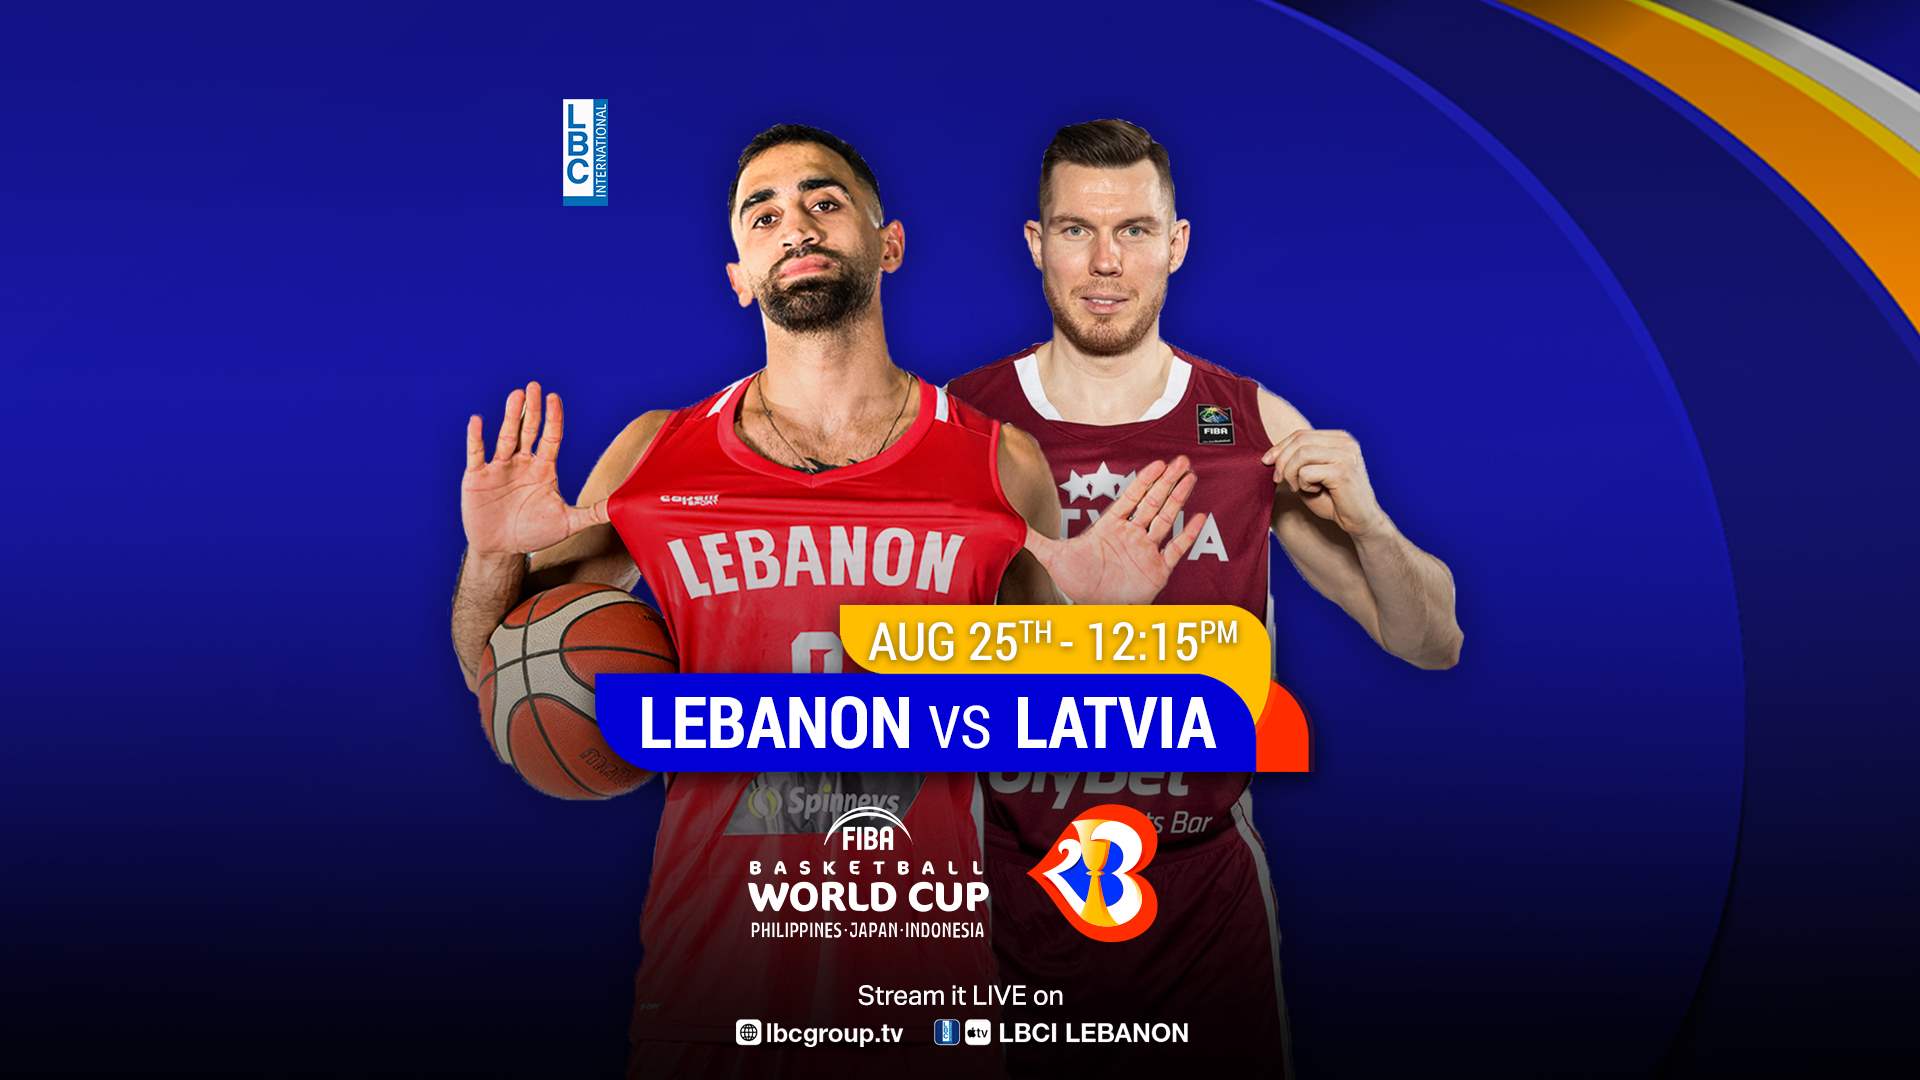 Tip-off Alert! Lebanon vs Latvia in the FIBA Basketball World Cup at 12:10 PM. Tune in on LBCGroup.tv or LB2!